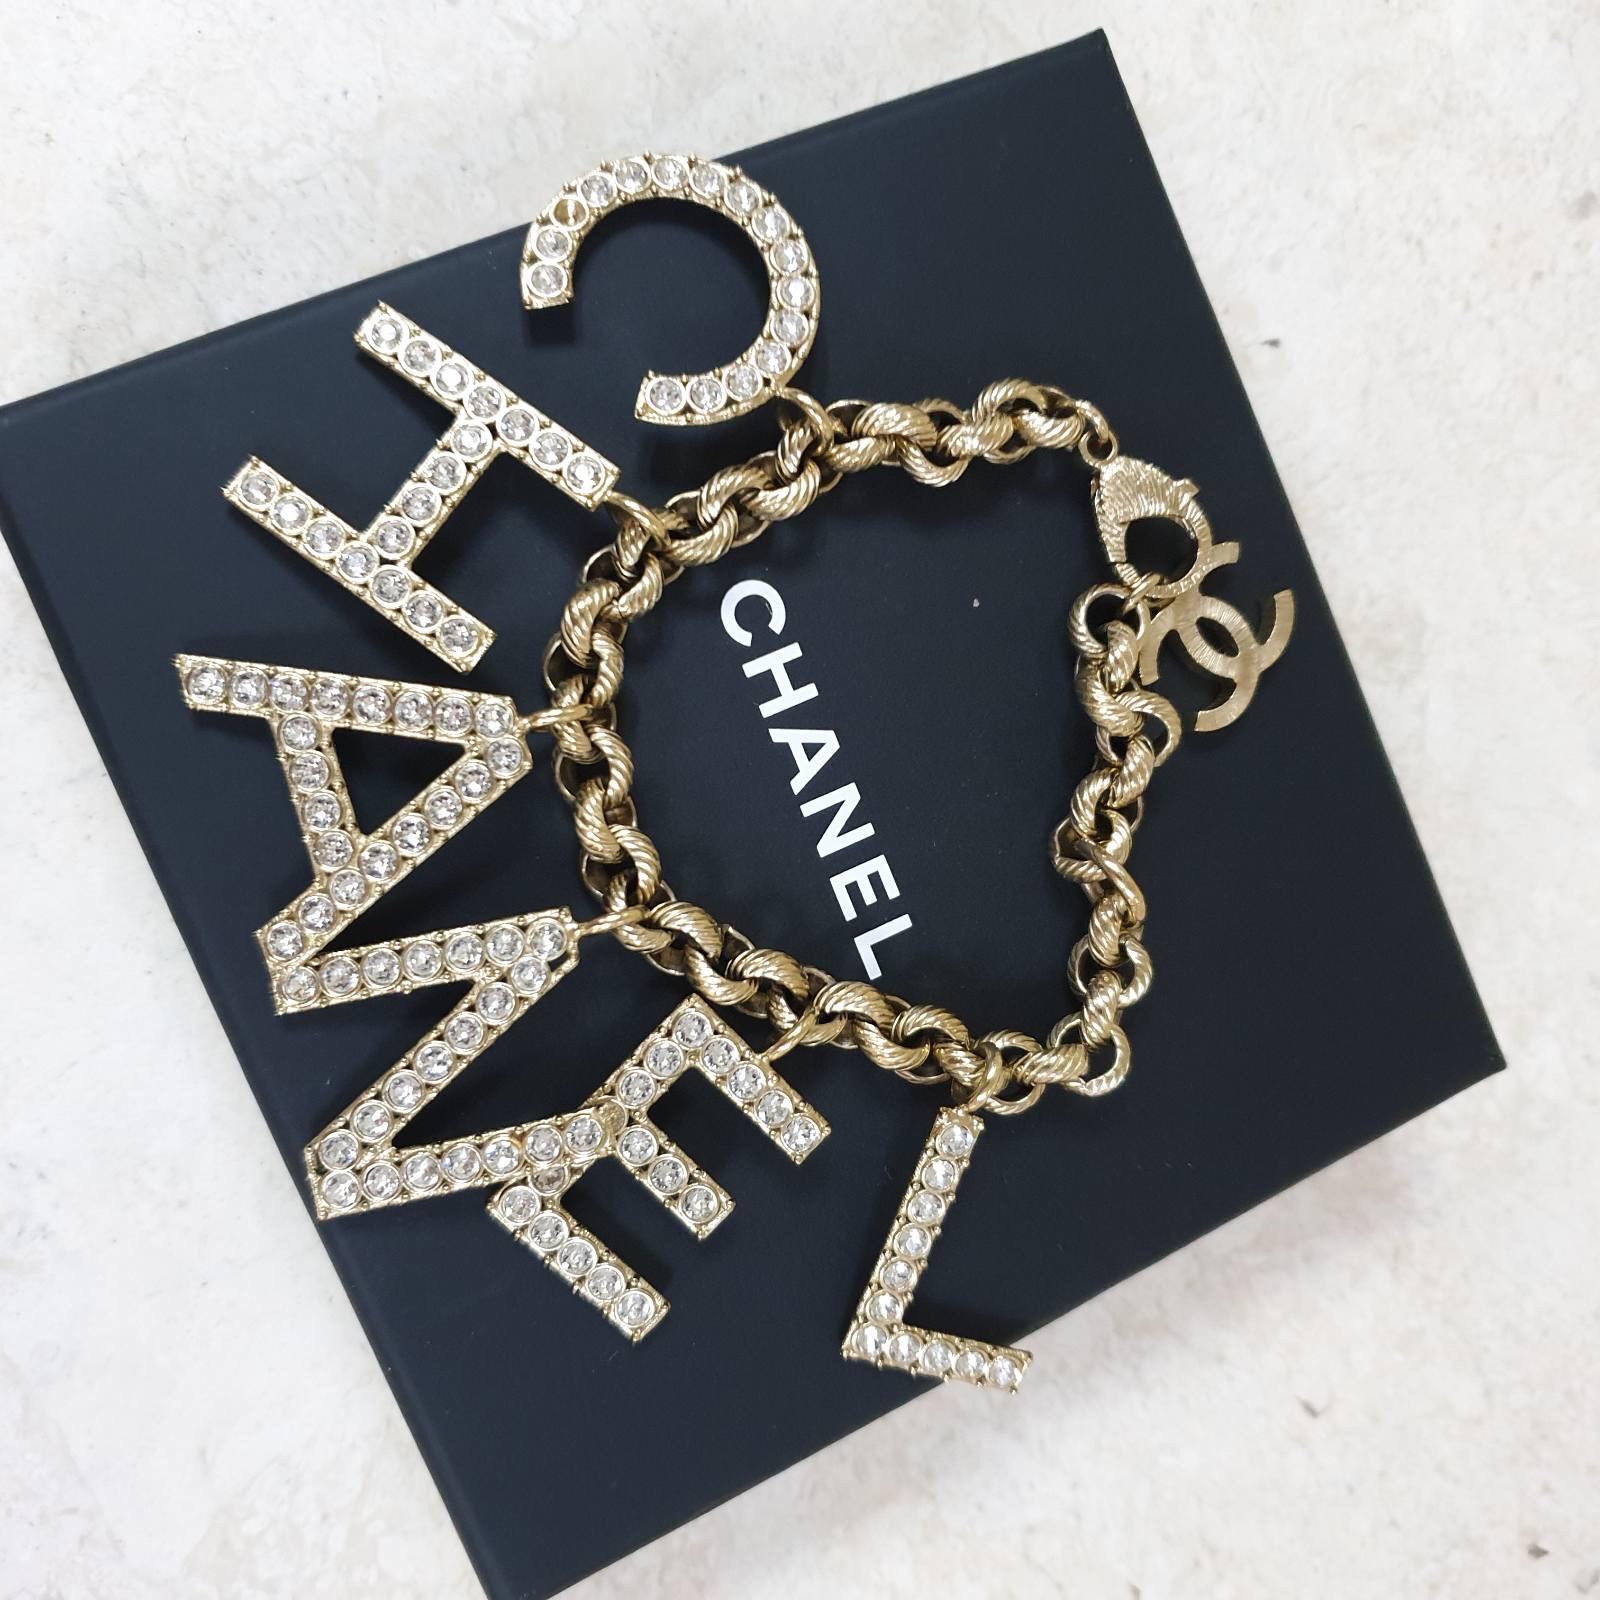 CHANEL ALPHABET CHARM BRACELET
Very rare item.
Soldout everywhere.

Stunning runvay collector's item.

Absolutely unique

Comes with original box.

Condition is very good but there is one lost crystal on charm 